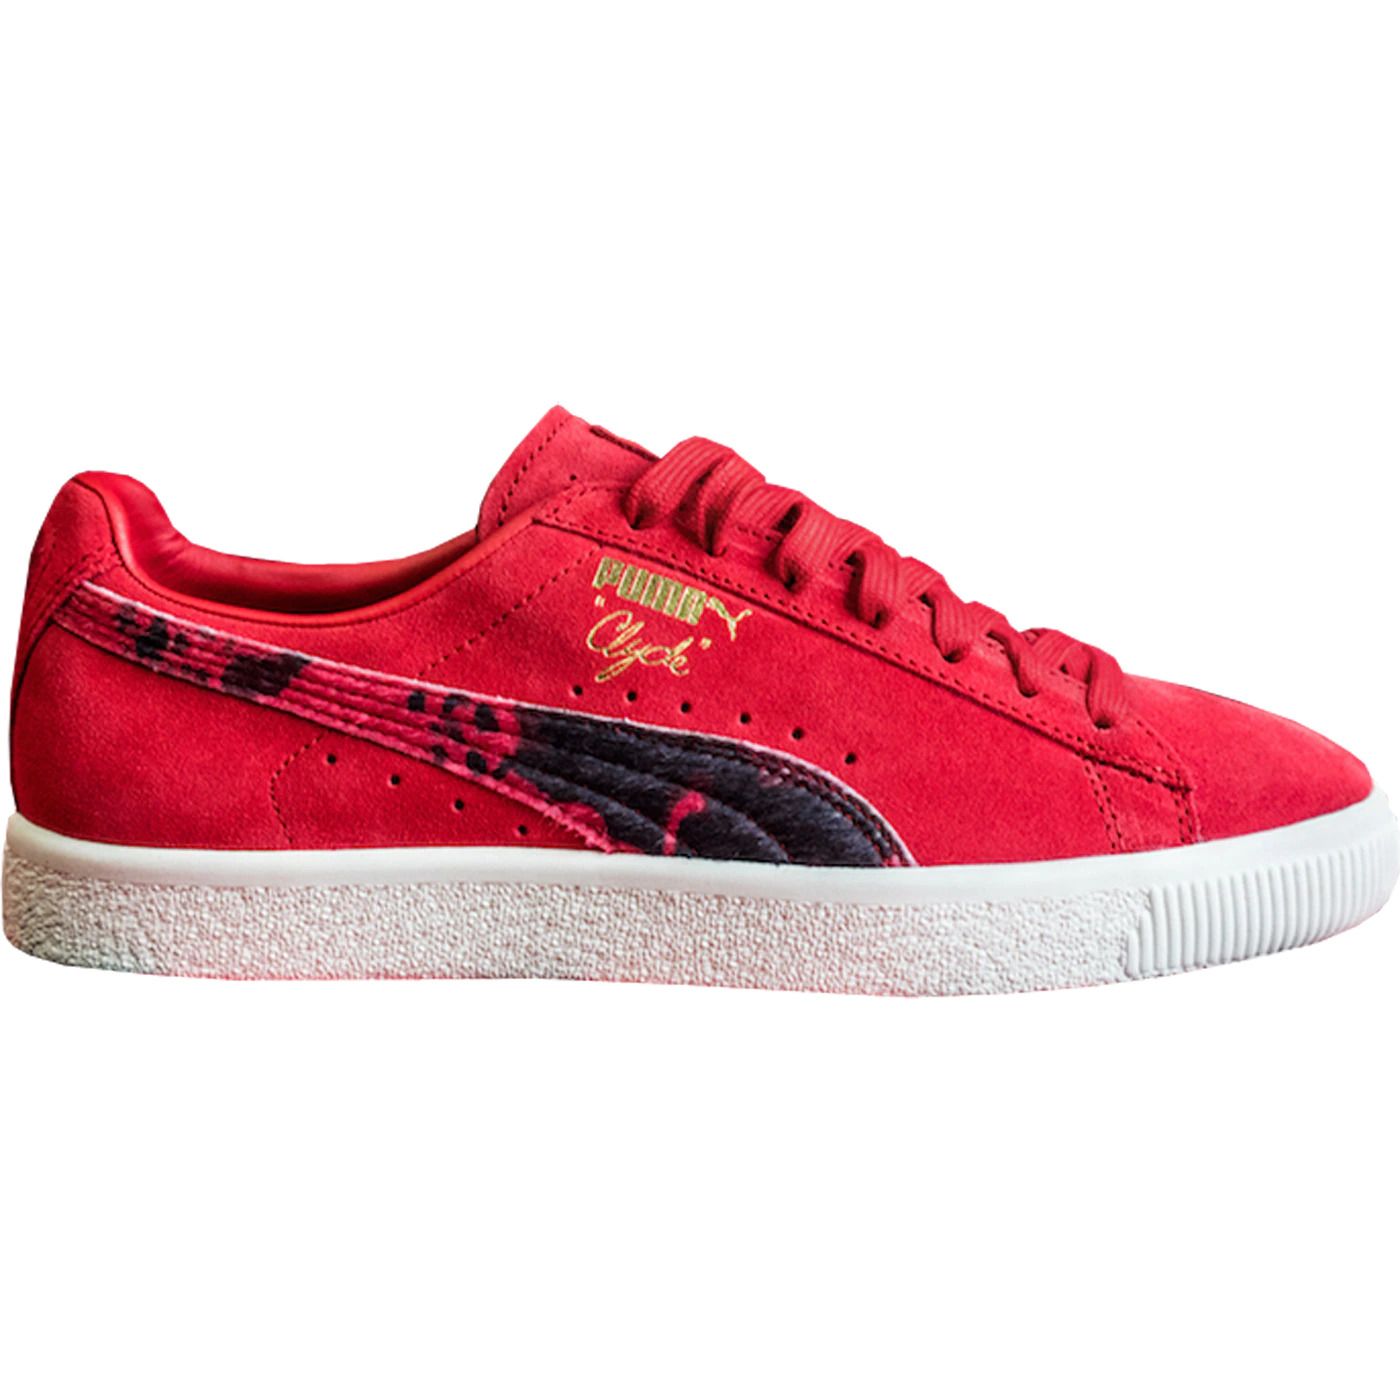 Packer Shoes x Puma Clyde Cow Suit Red